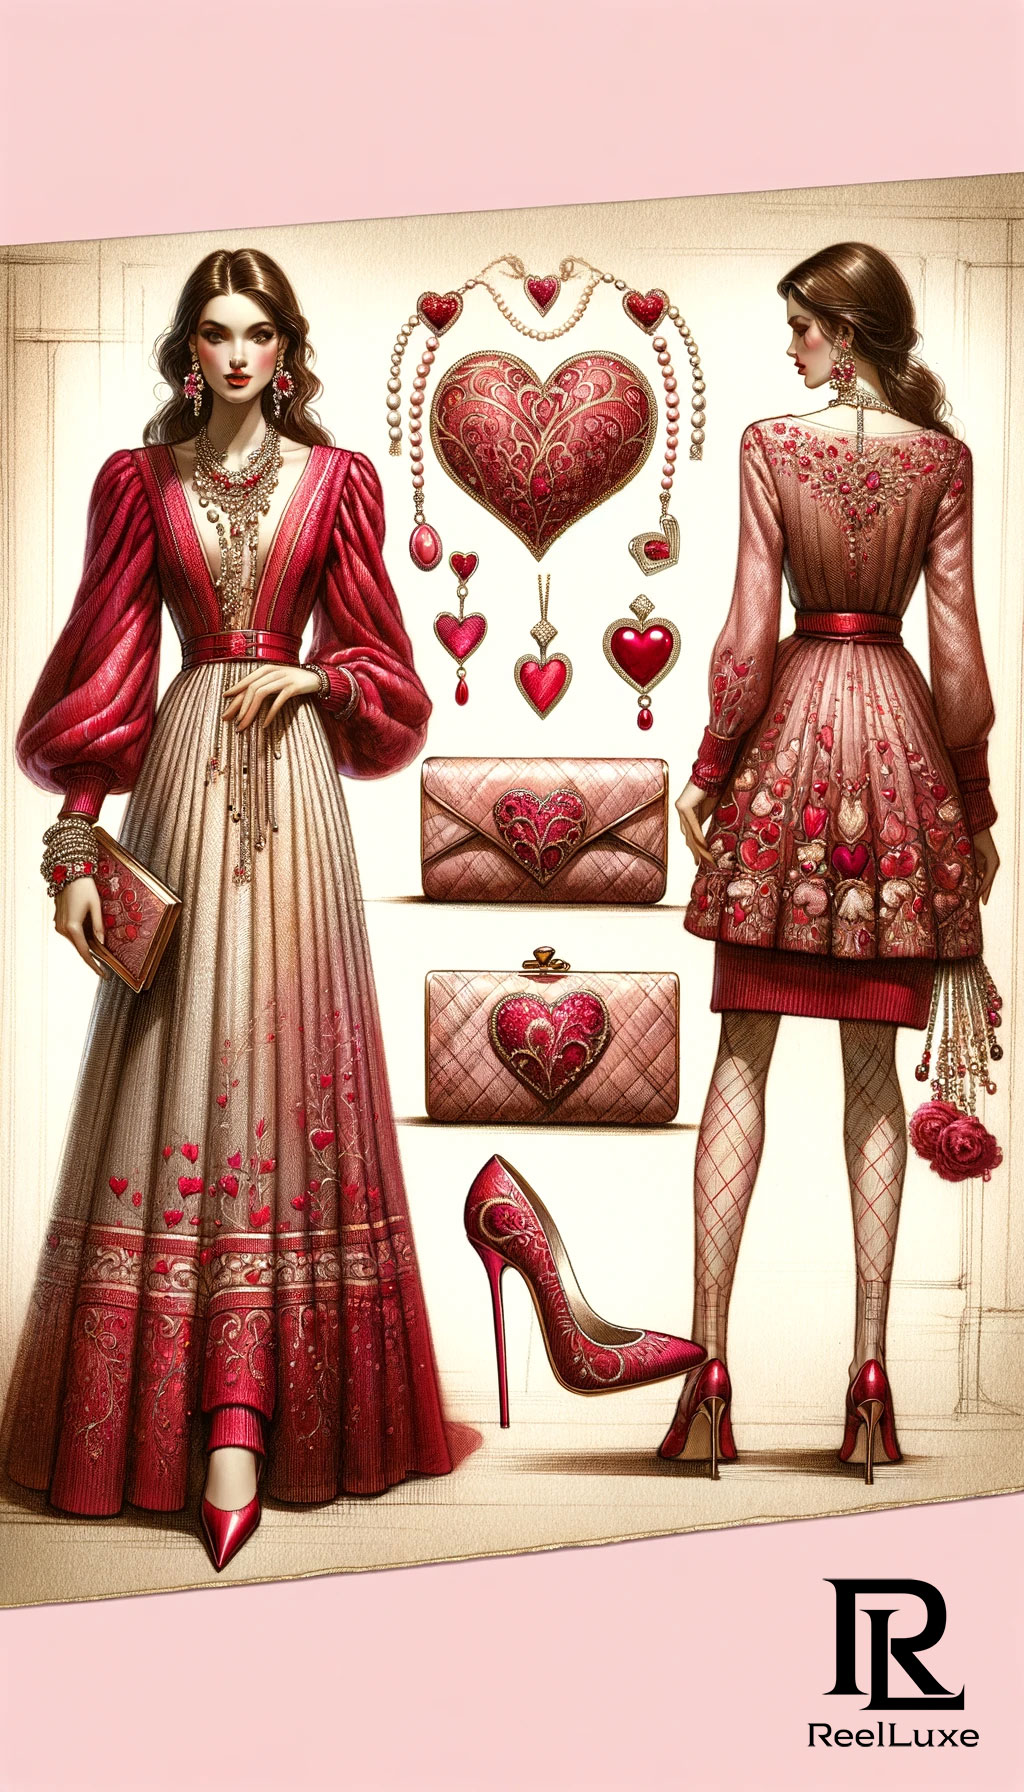 Romance in the Air - Valentine's Day - Beauty and Fashion - 10